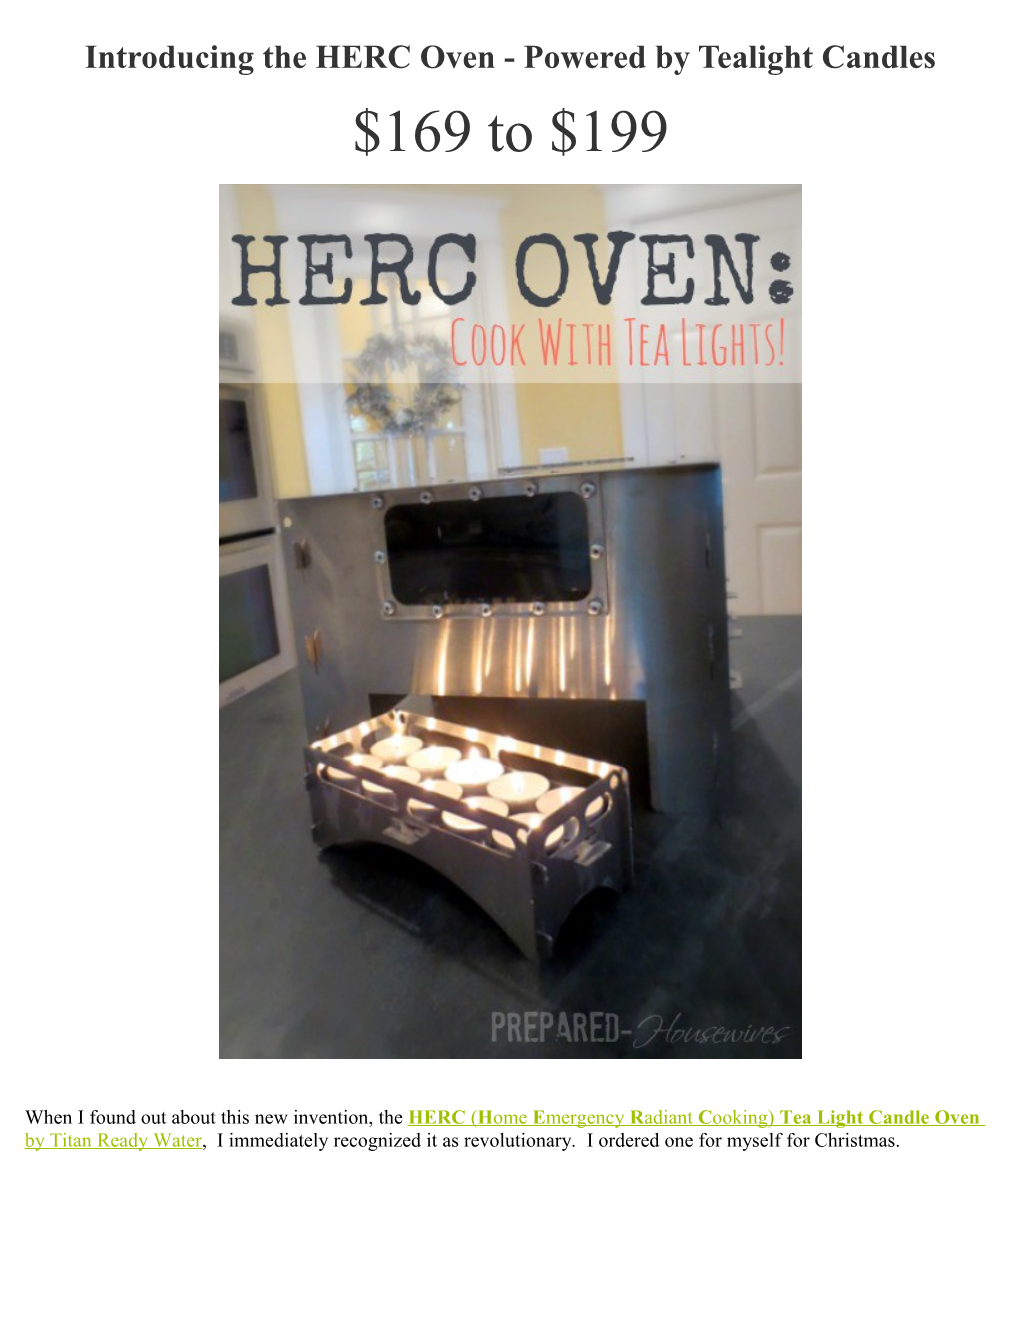 Introducing the HERC Oven - Powered by Tealight Candles